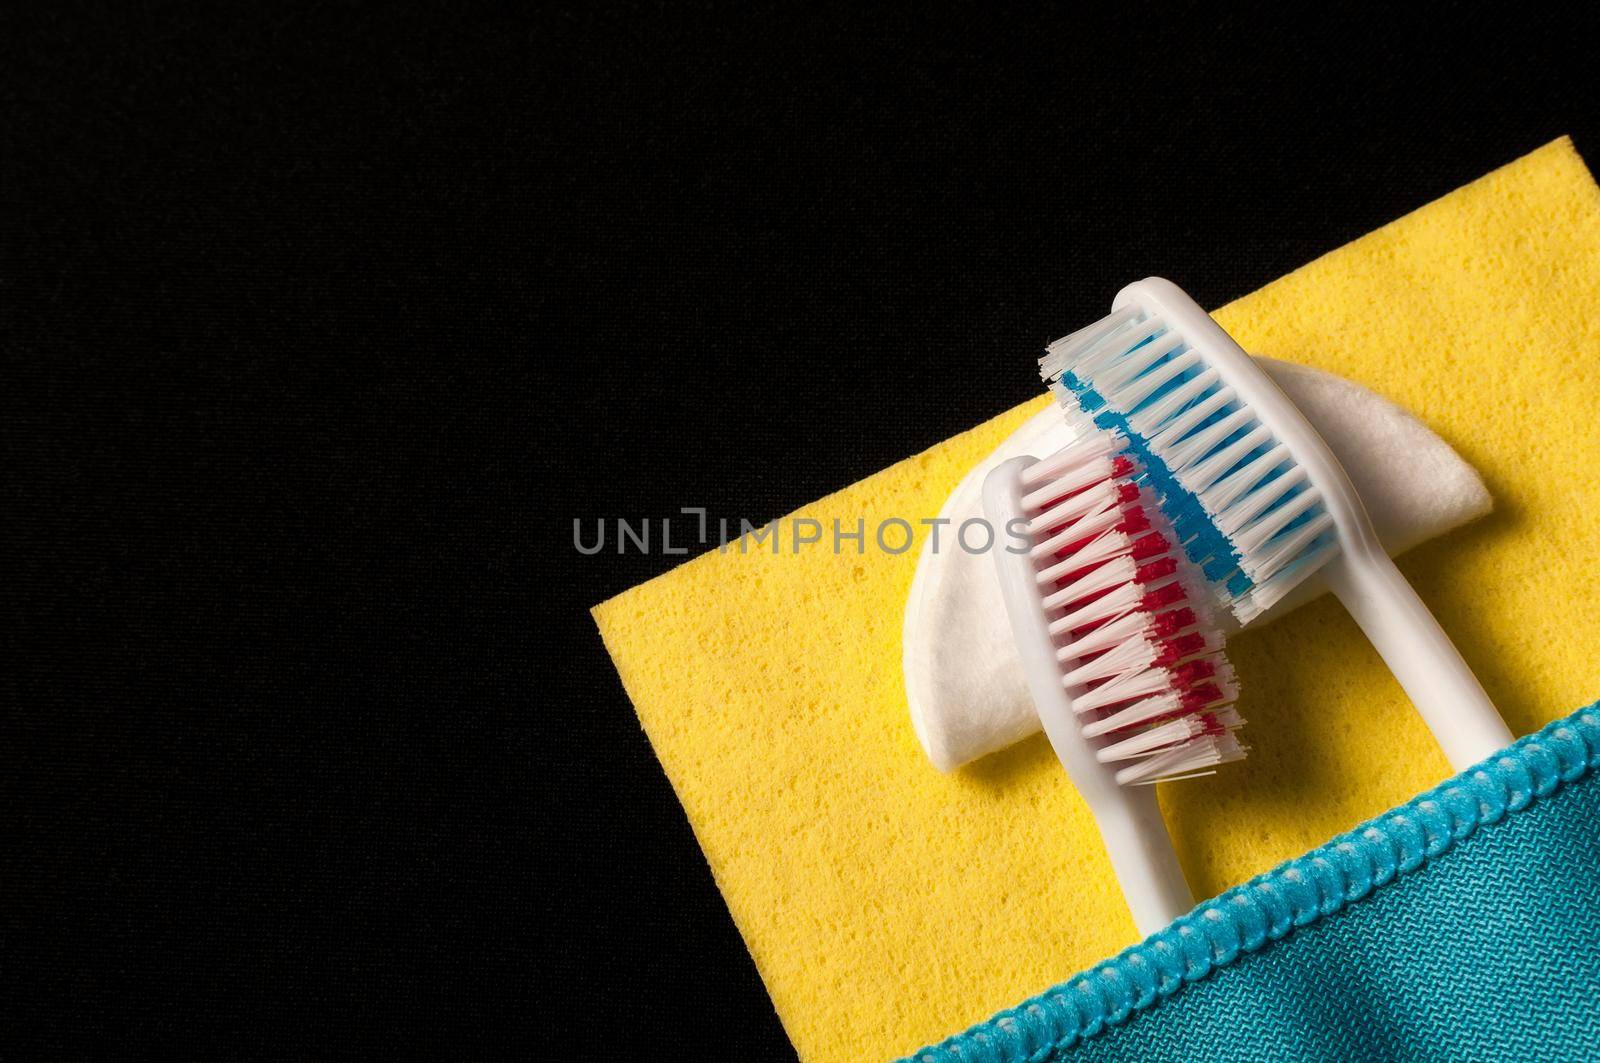 Toothbrushes under a blanket, on a black background